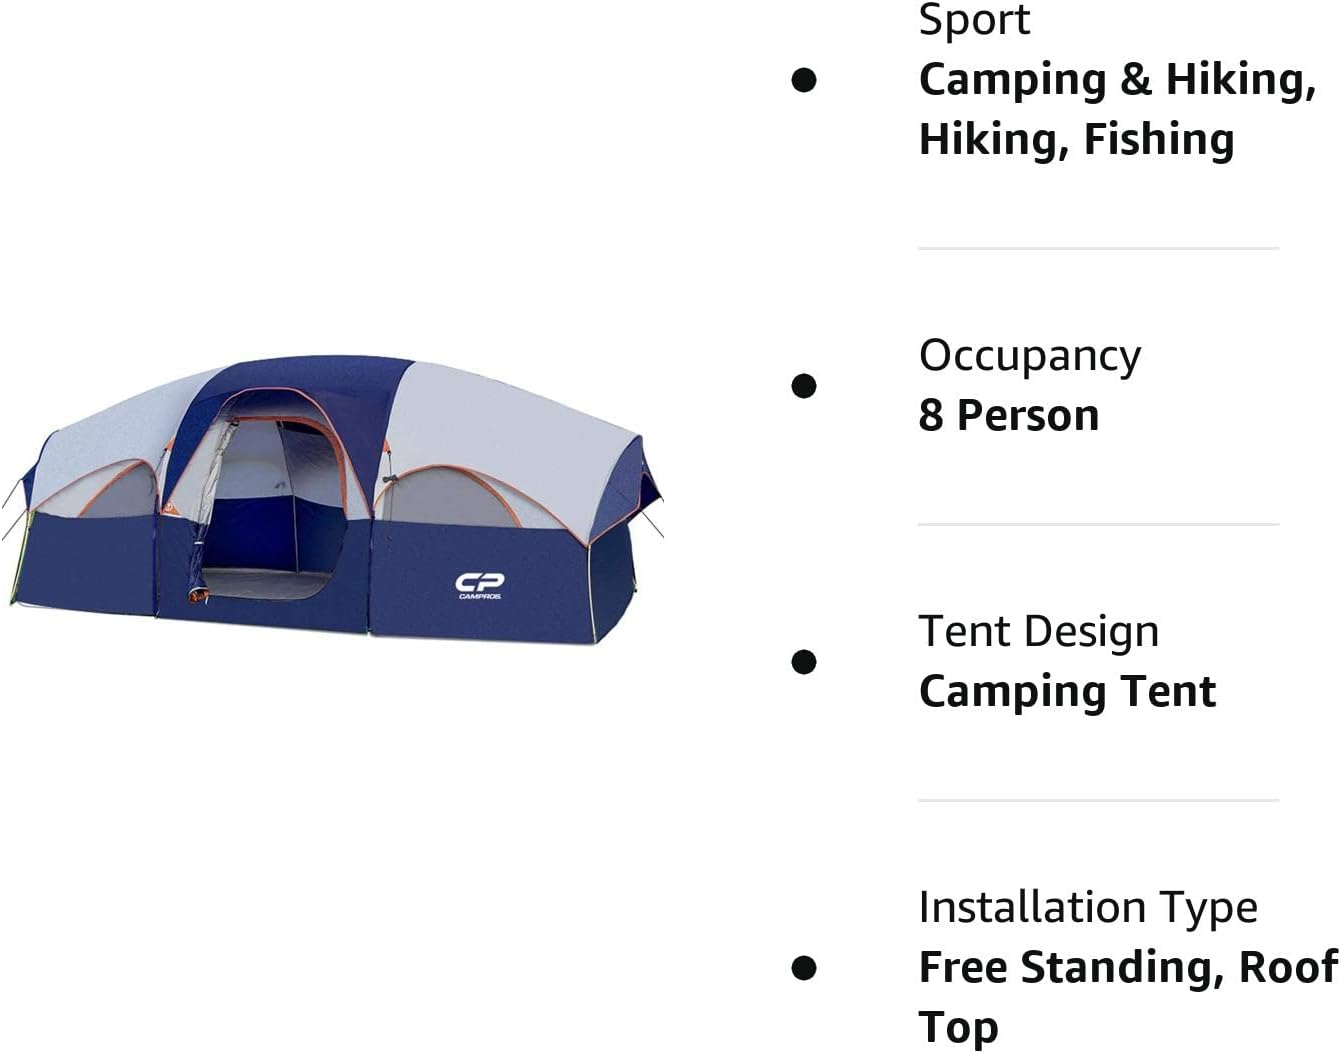 Campros Cabin Tent For 8 Person Feature